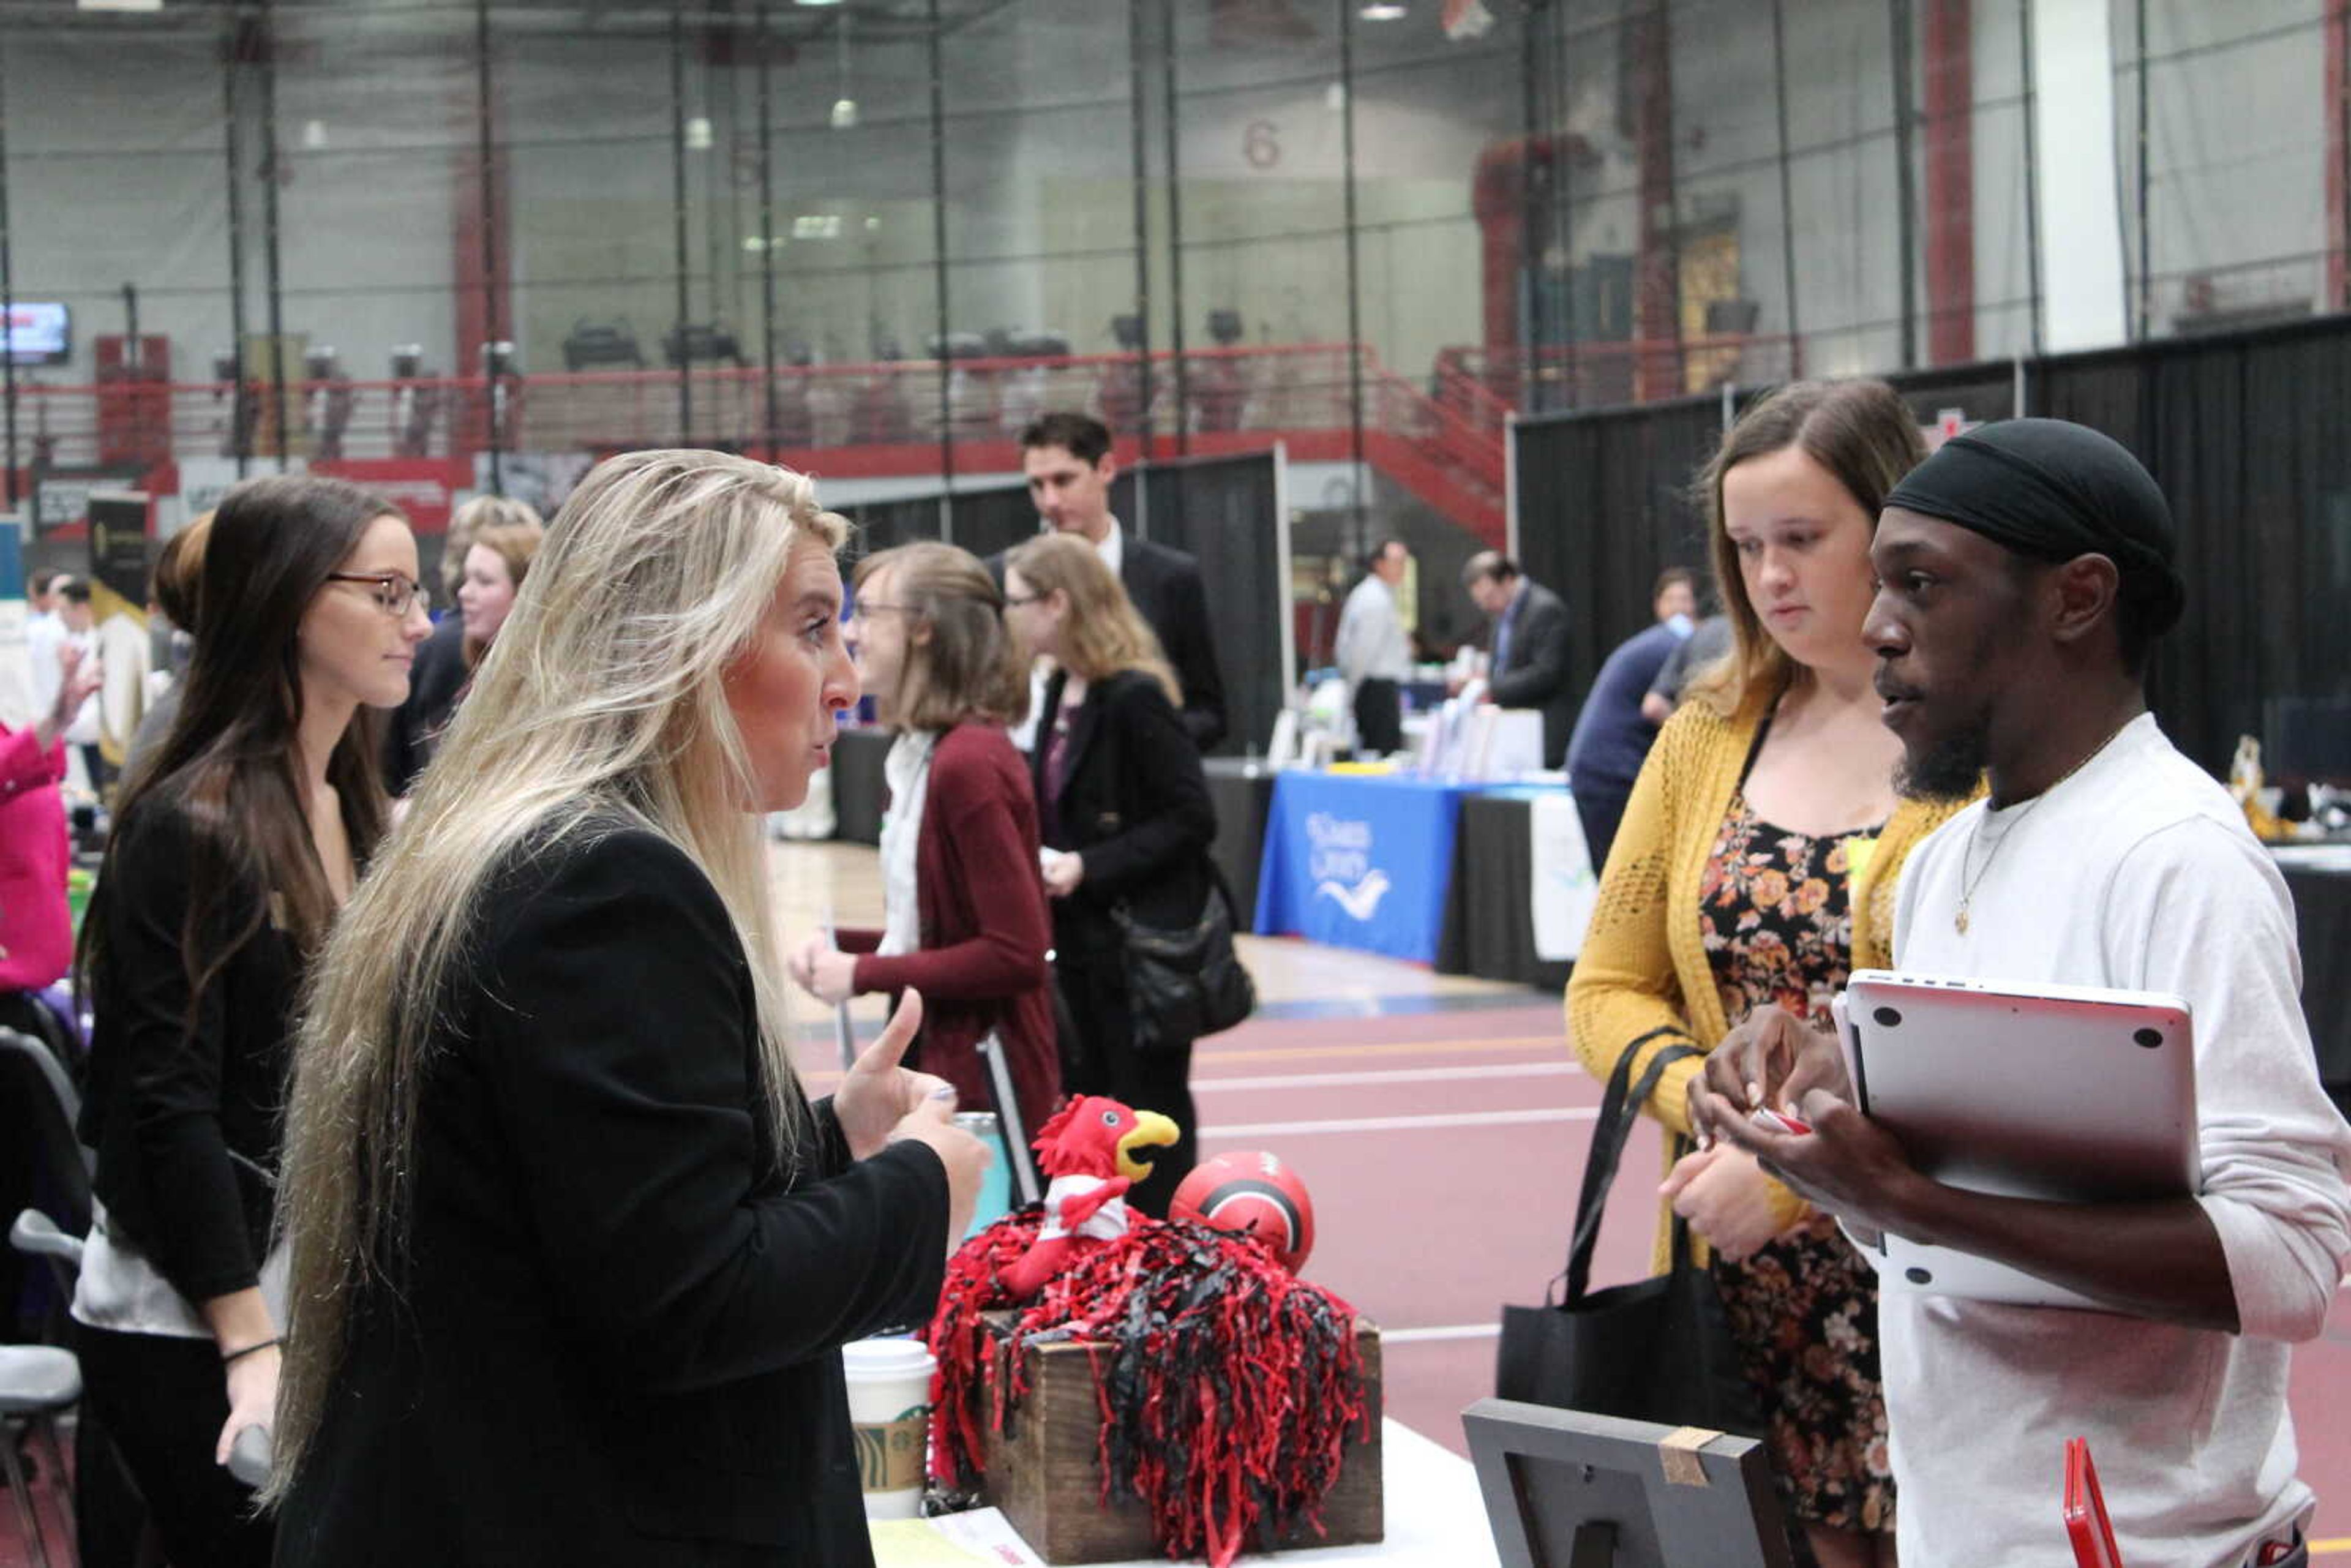 Southeast students Martin Woods and Danielle Thiemp talk with Alicia Ticer, Director of Marketing and Student engagement at Chartwells during Southeast's Fall Career Expo at the Show Me Center on Thursday, Oct. 10 in Cape Girardeau, Missouri.